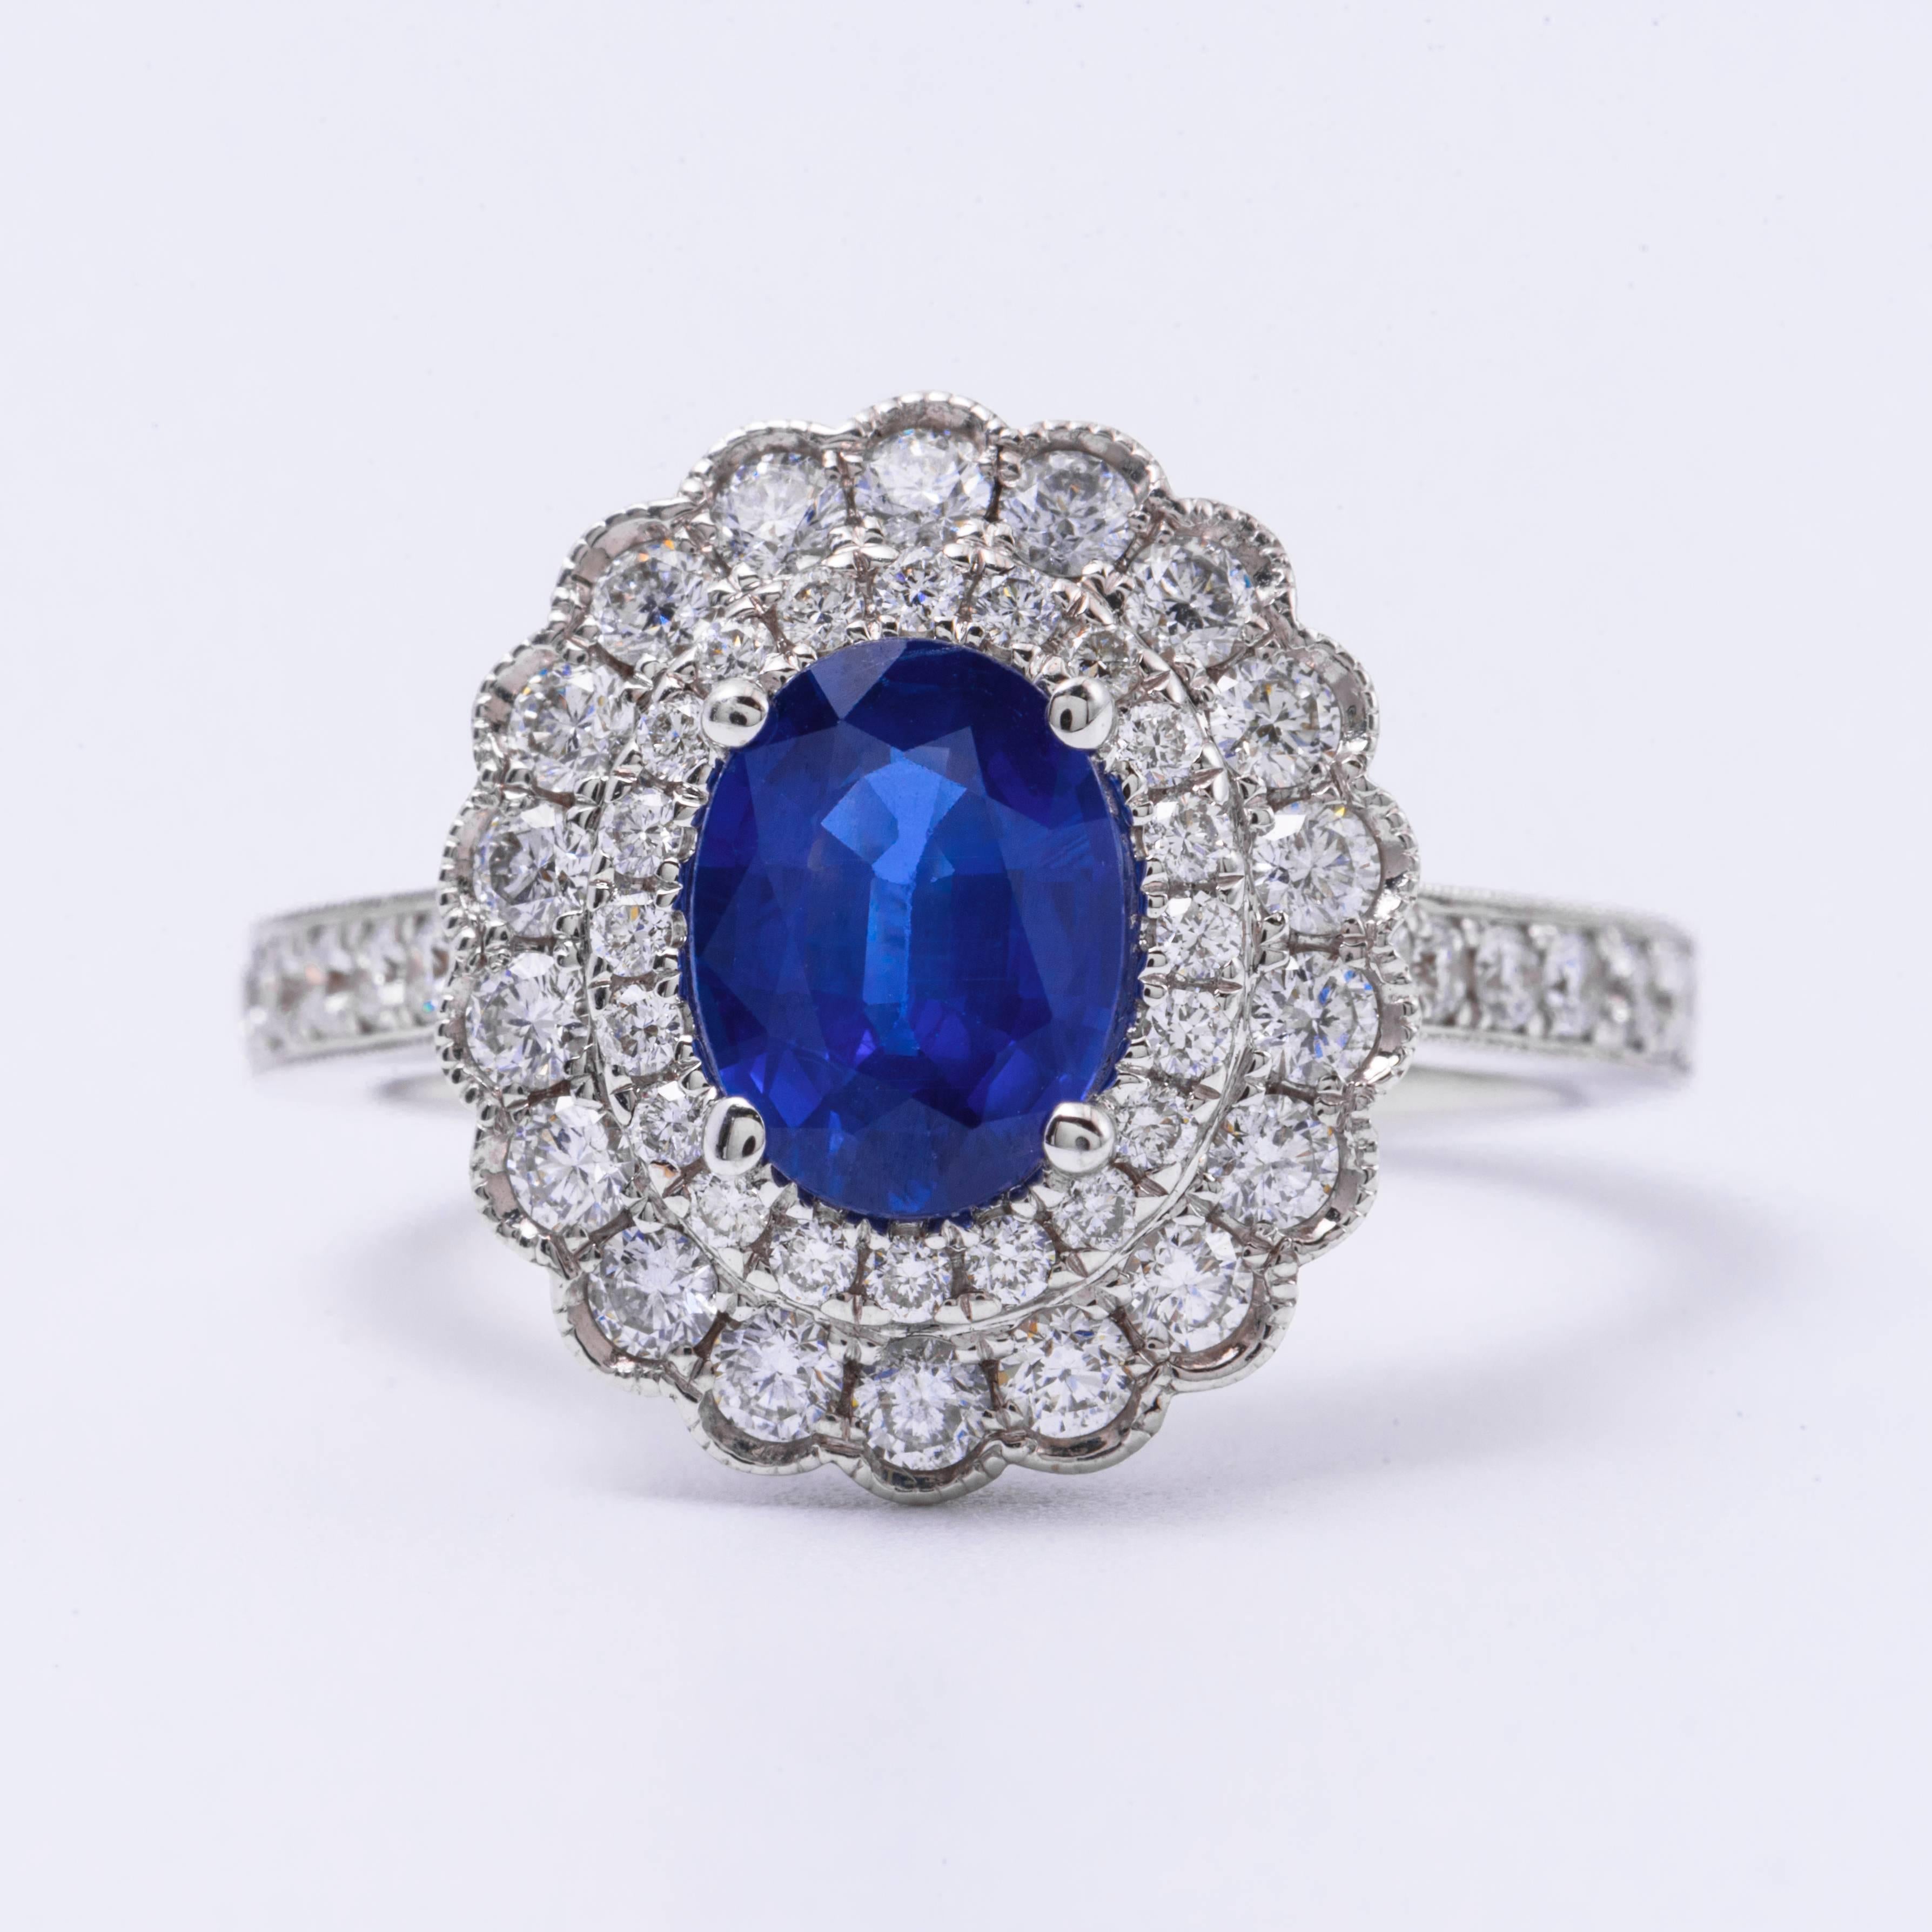 Oval Sapphire measuring 8 x 6 mm  Weight: 1.45 Cts
18K White Gold
Diamonds : 0.81 Cts.